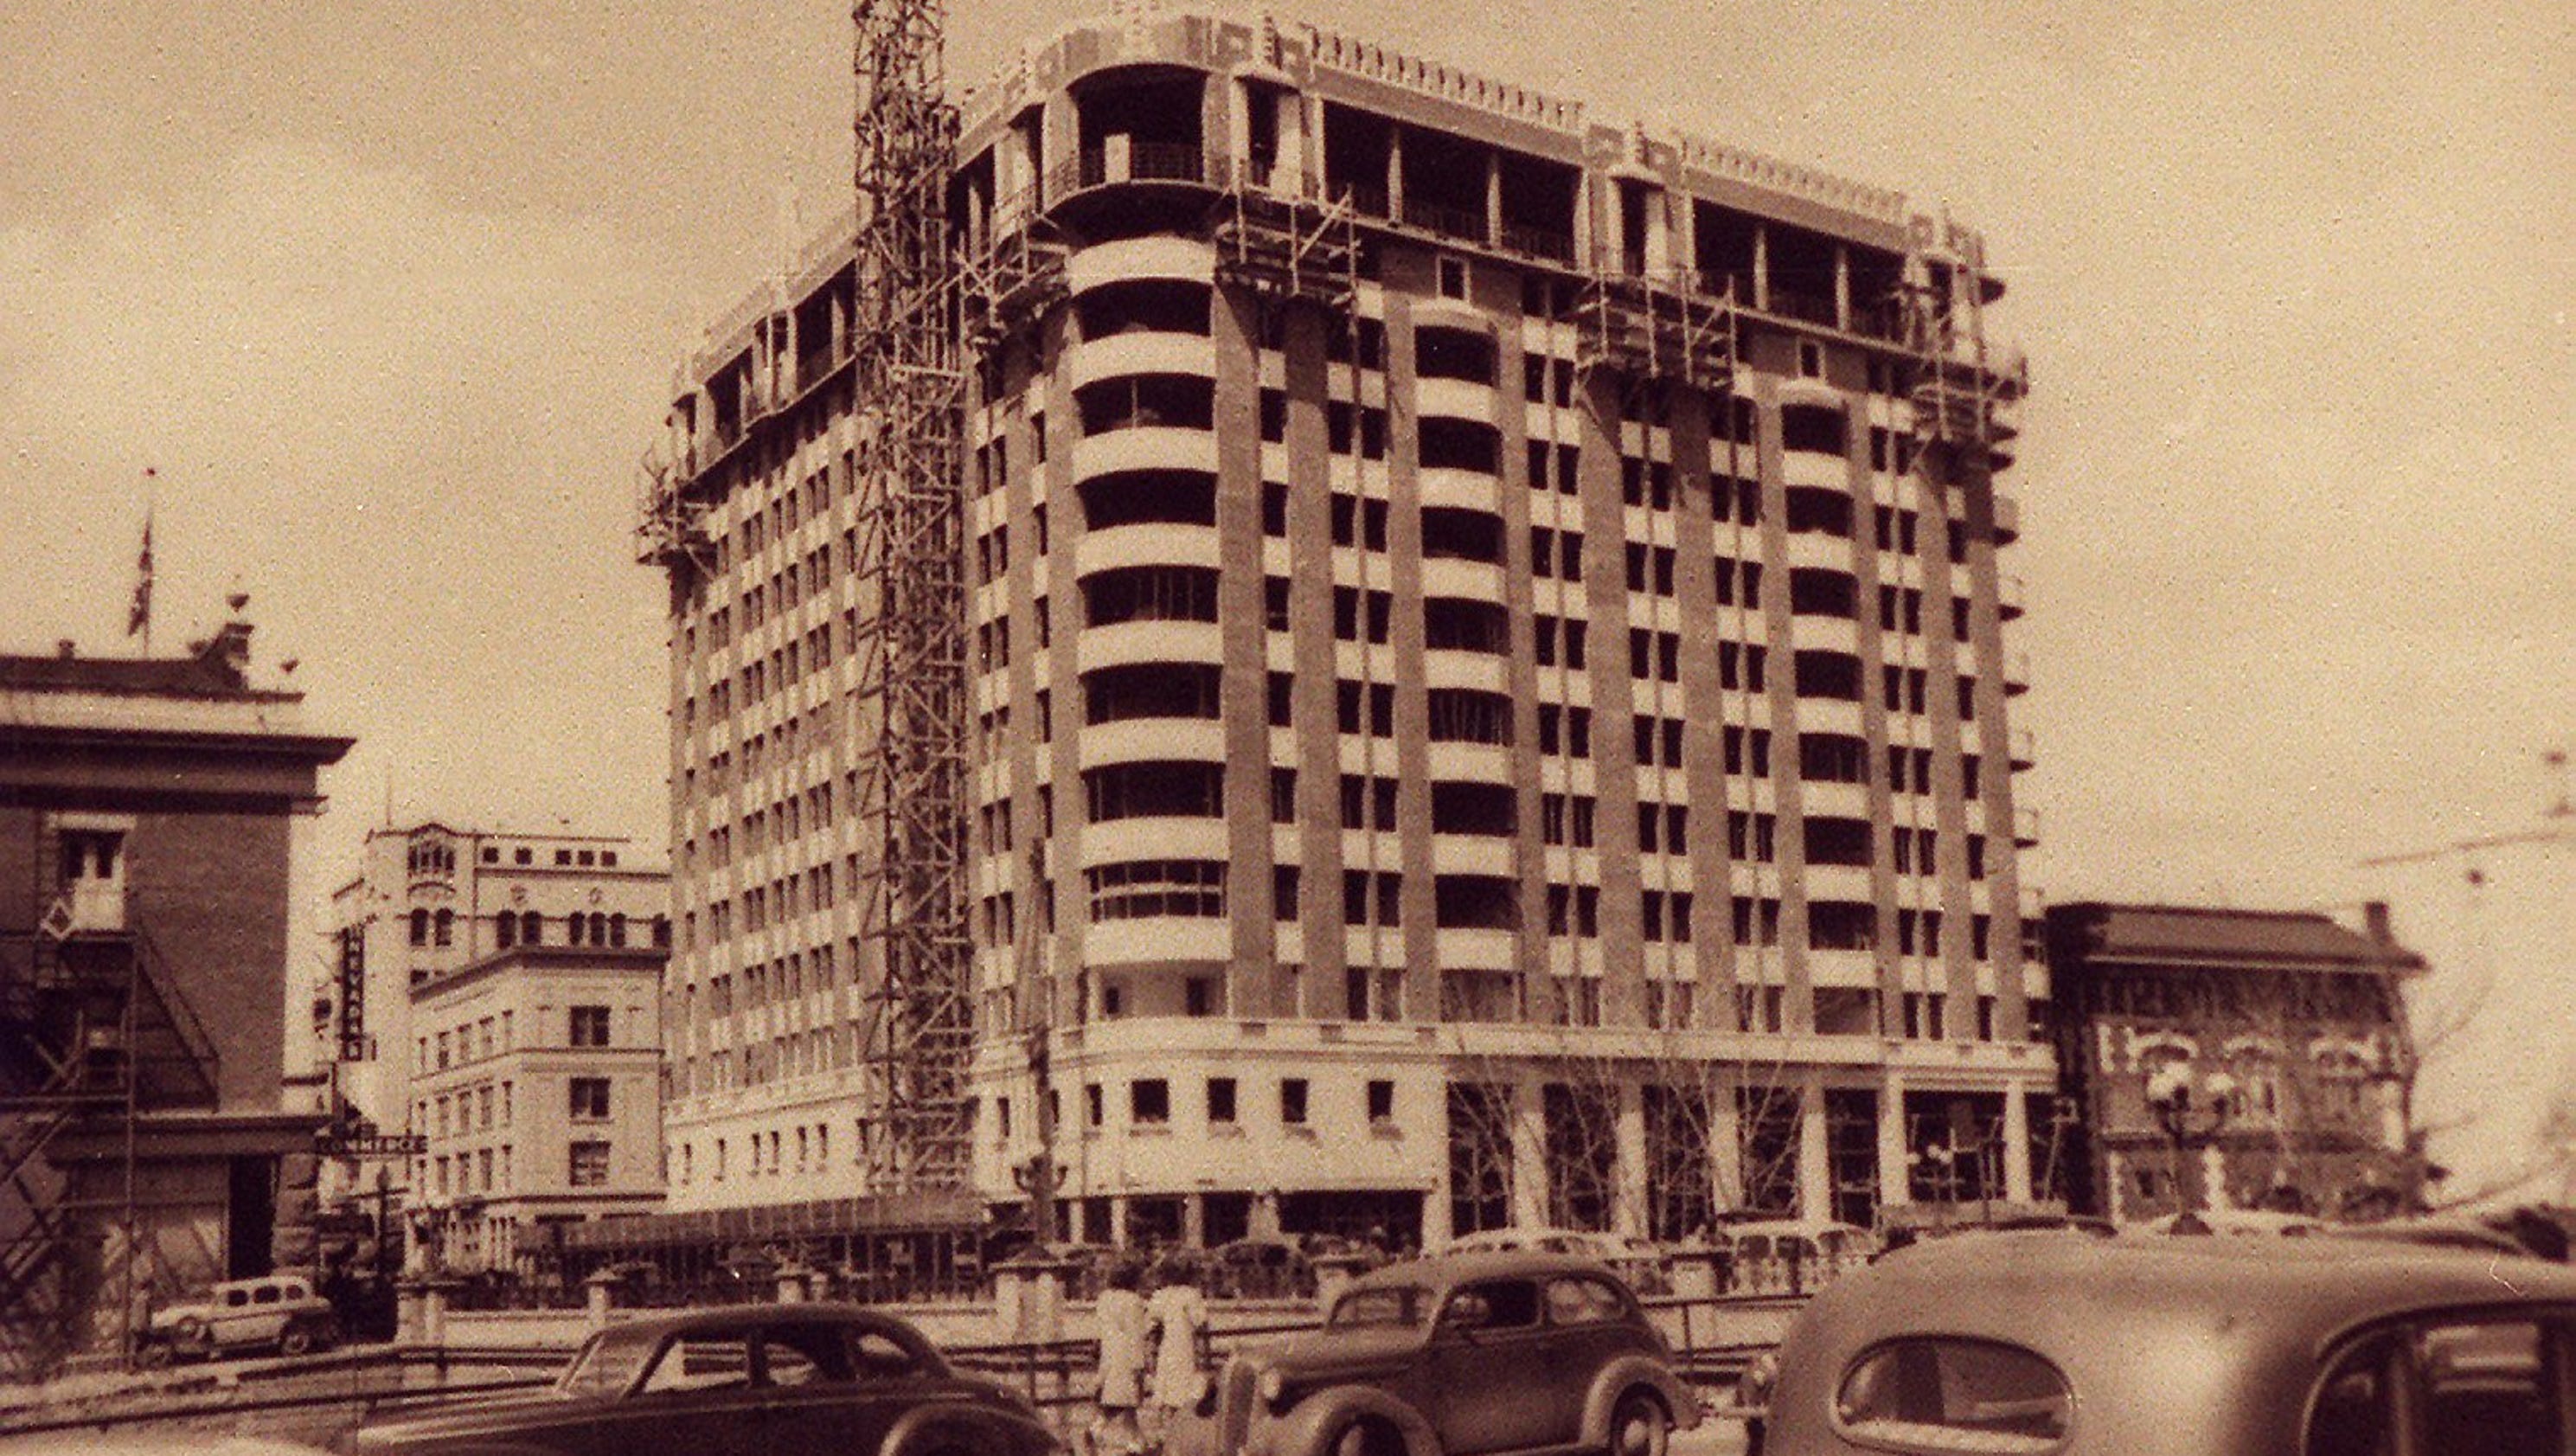 Mapes Hotel - Photos: A look back at the Mapes Hotel - Feb 20, 2015 ... Reno residents watch the Mapes take shape in 1947.